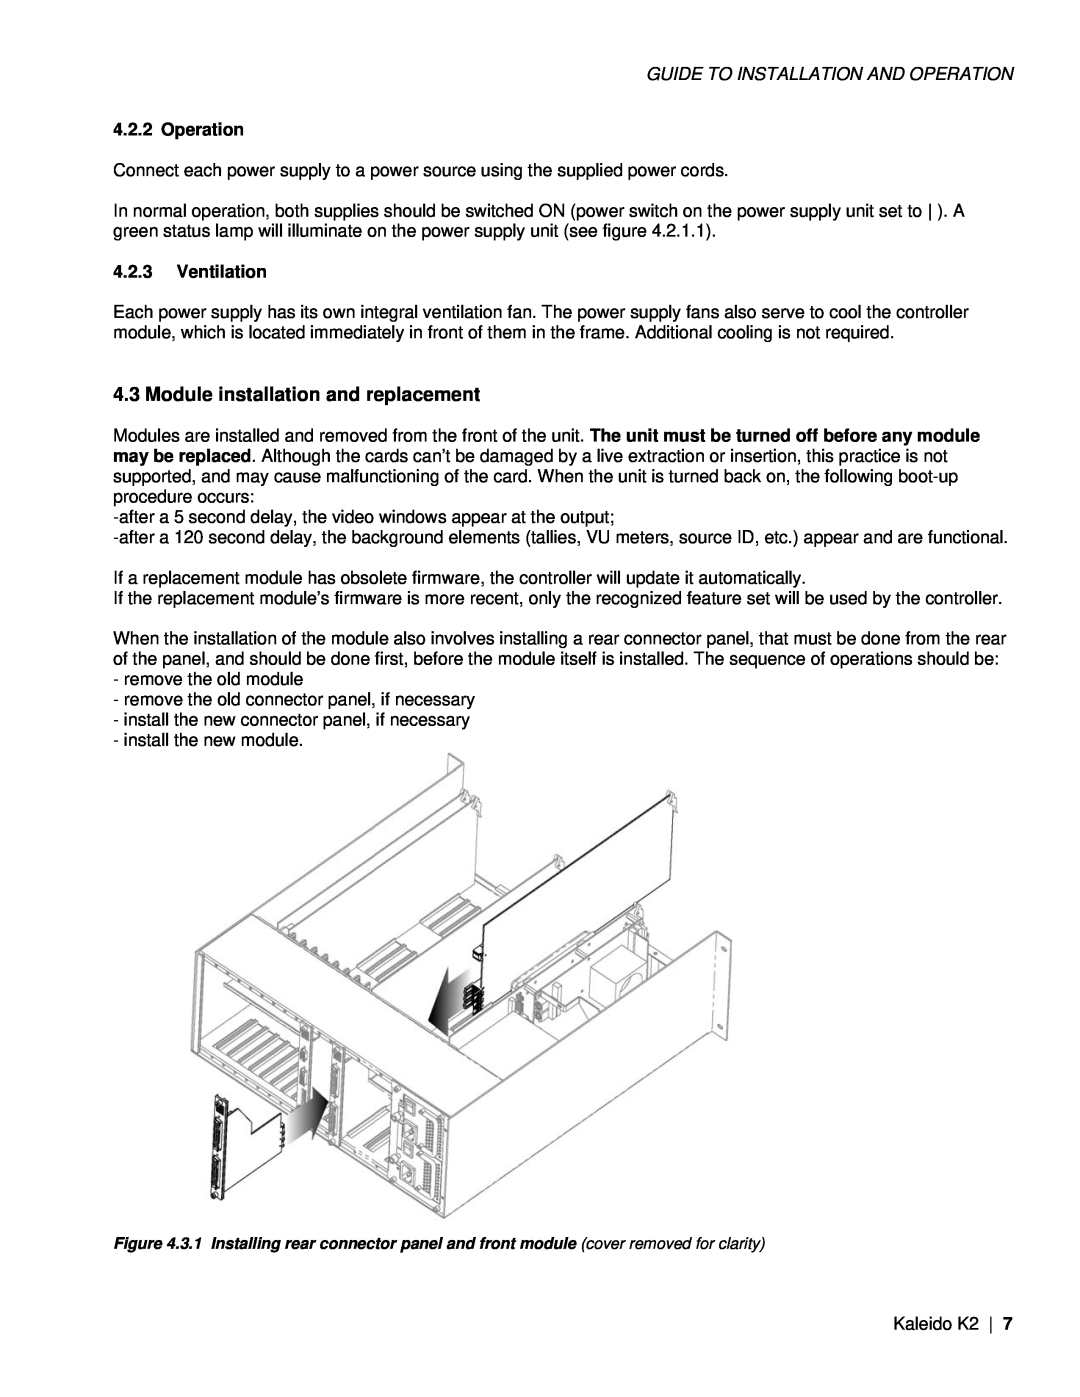 Miranda Camera Co KALEIDO-K2, M406-9900-402 specifications Module installation and replacement, Operation, Ventilation 